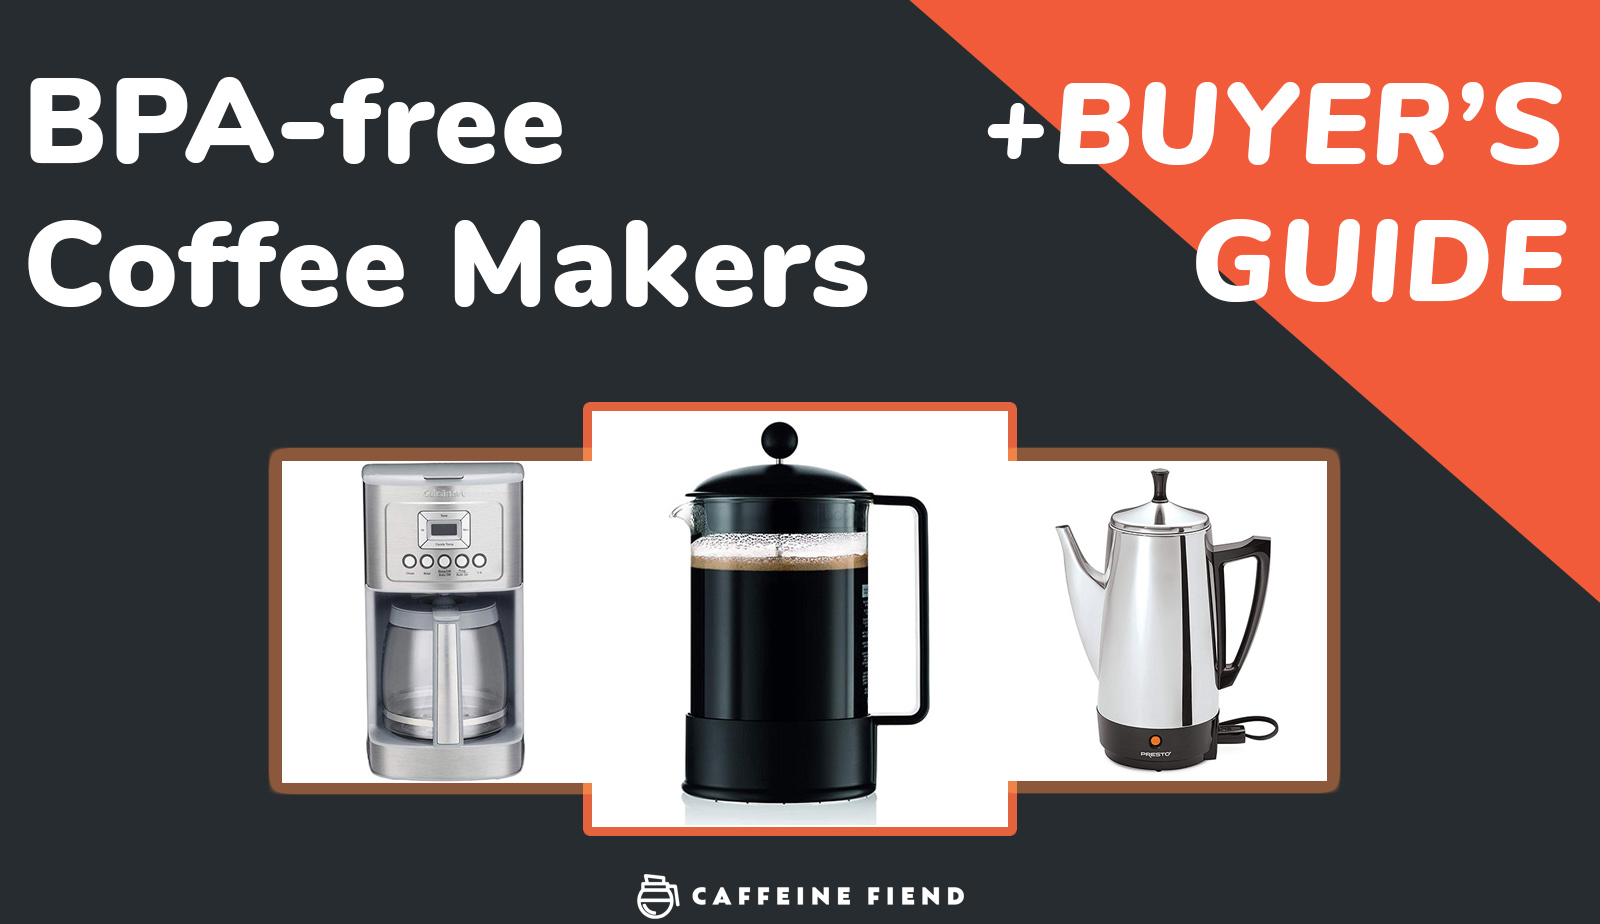  Gourmia GKCP135 Manual Coffee Brewer - Single Serve Manual Hand  French Press Coffee Maker - No Electricity - Brew Coffee Anywhere - Green:  Home & Kitchen